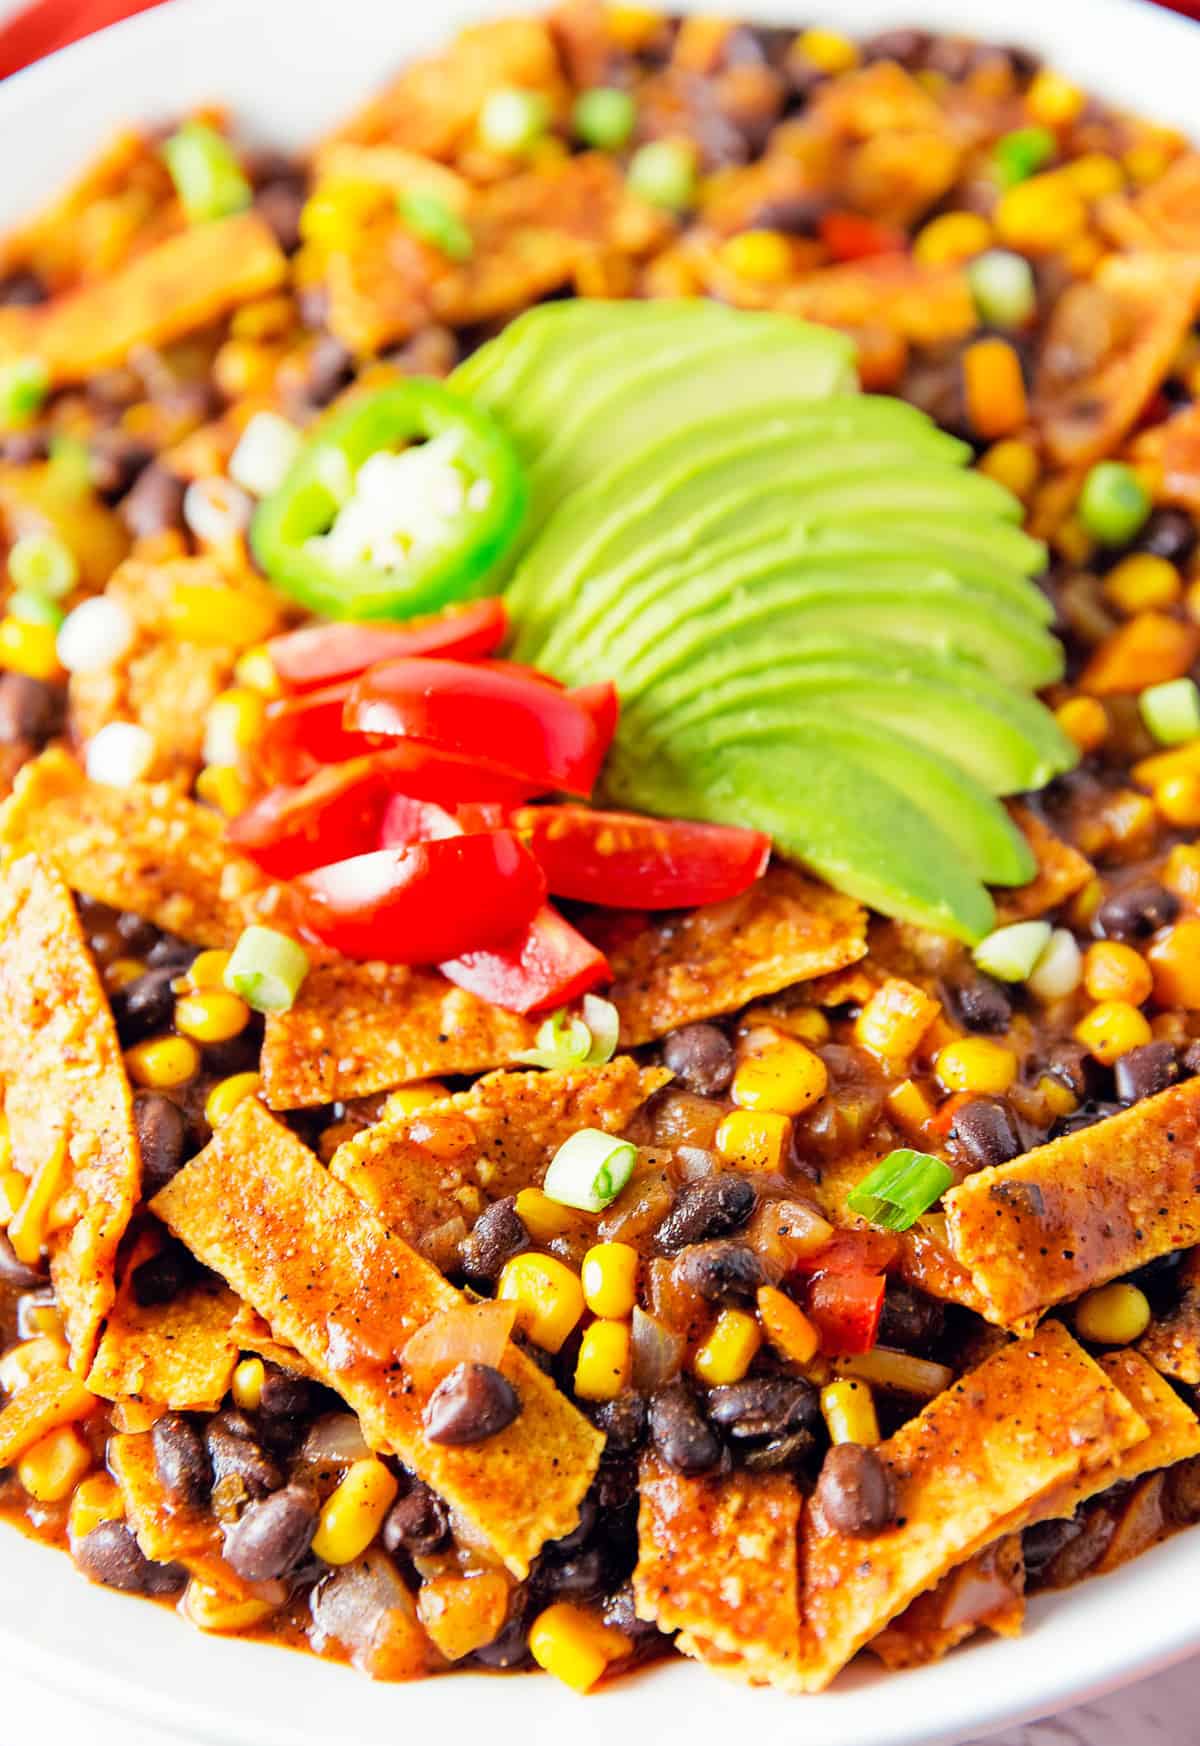 enchilada skillet, enchilada, enchiladas, tortillas, recipe, enchilada recipe, enchilada skillet recipe, vegan, vegan recipe, whole food plant based recipe, whole food plant based, vegetarian, vegetarian recipe, gluten free, gluten free recipe, vegan dinner, vegan meals, vegetarian dinner, vegetarian meal, whole food plant based dinner, whole food plant based meal, gluten free dinner, gluten free meal, healthy, oil free, no oil, bell peppers, corn, black beans, enchilada sauce, peppers, tomato, quick dinner, fast dinner, entertaining, wfpb, dairy free, no dairy, traditional, Mexican, classic, delicious, the best, winter, fall, spring, summer, fast, easy, quick, simple, 30 minutes,